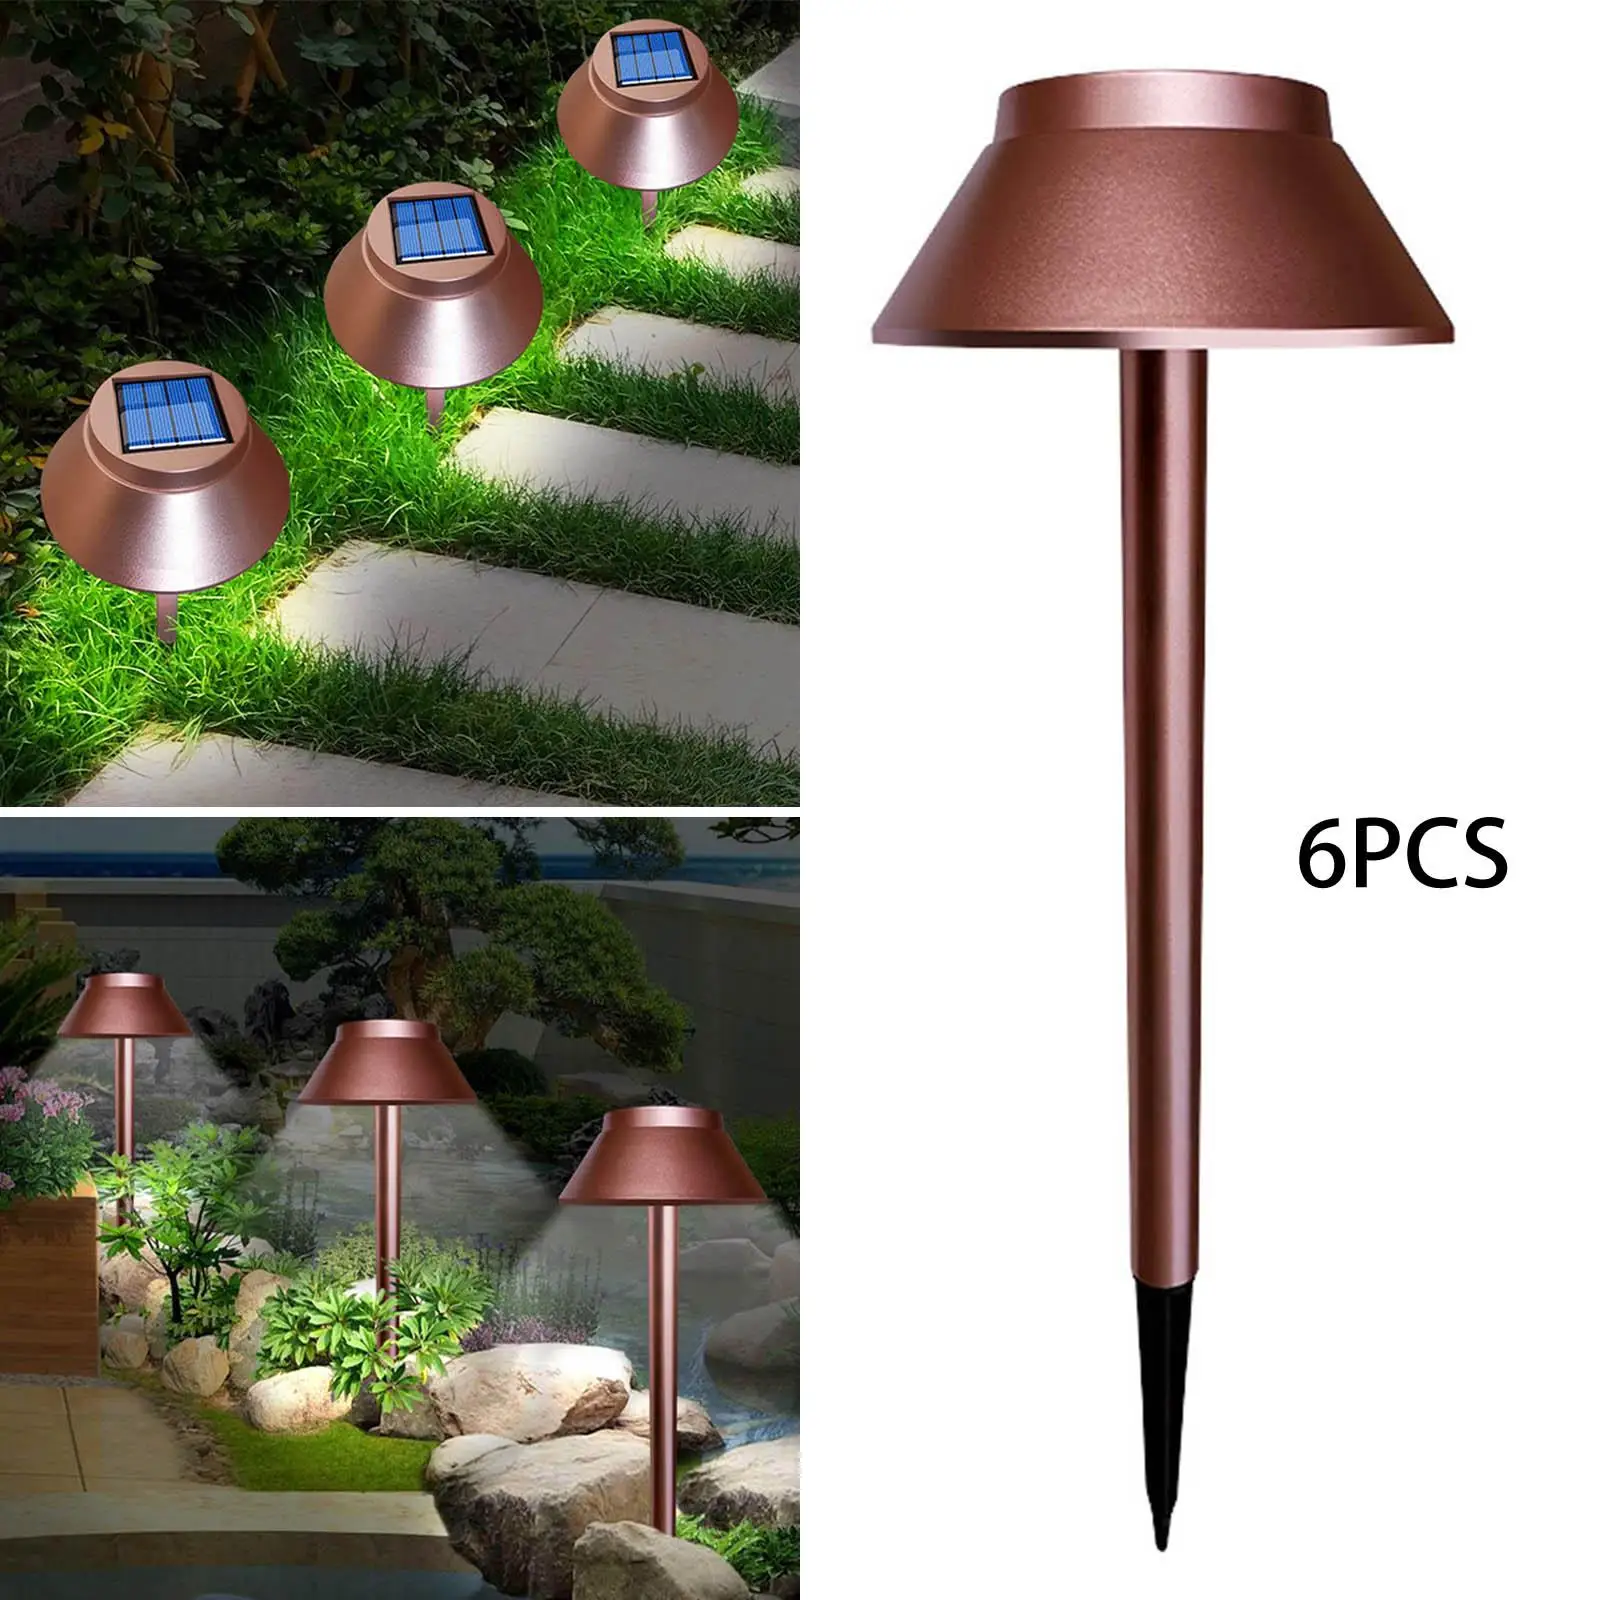 6x Solar Powered Lawn Lights Landscape Lamp, for Lawn Walkway Courtyard Decoration